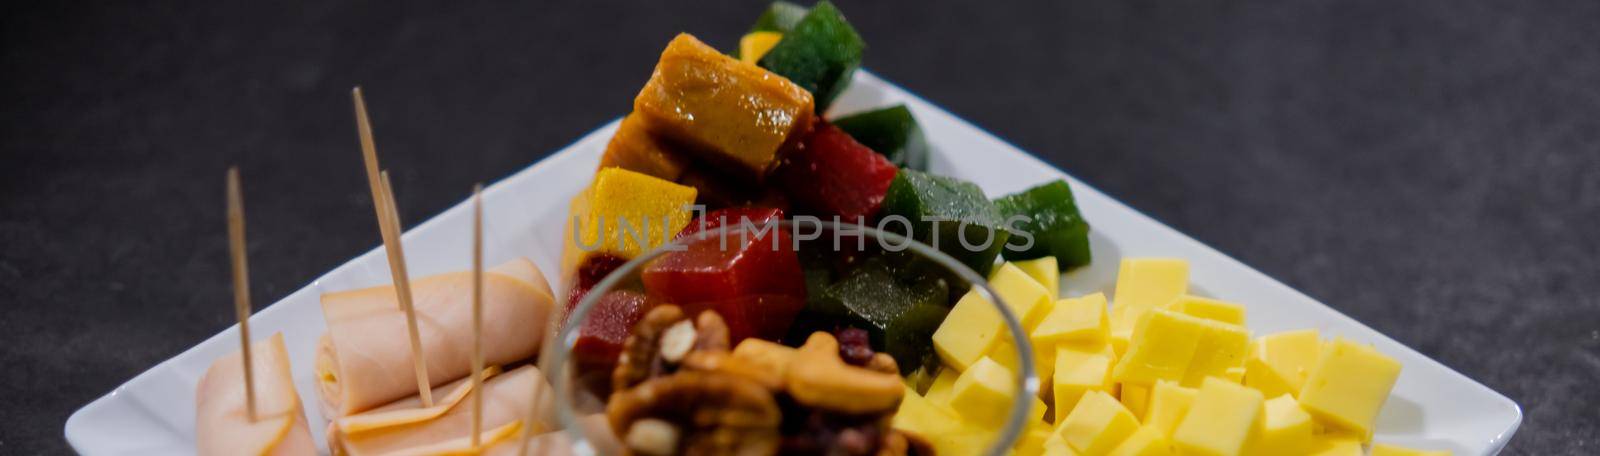 Ham rolls, diced fruit paste, cheese cubes, and nuts on square white plate by Kanelbulle